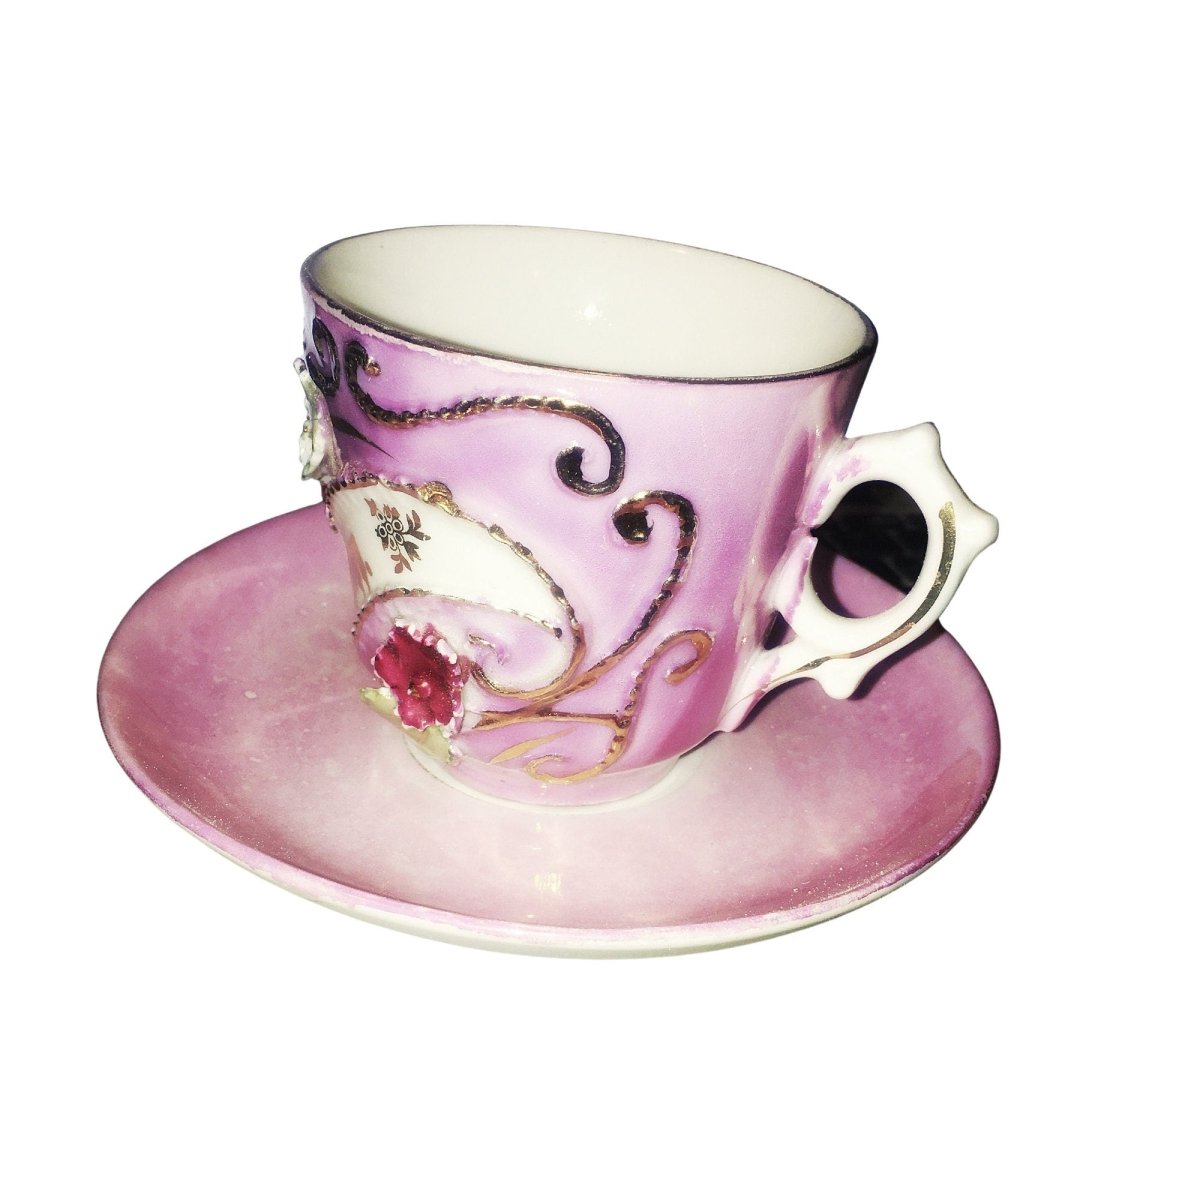 Lusterware | Victorian Antique Pink Father's Day Full Size Cup & Saucer, Traditional German Flintware, Vintage drinkware for Tea Parties - Chinamania.shop